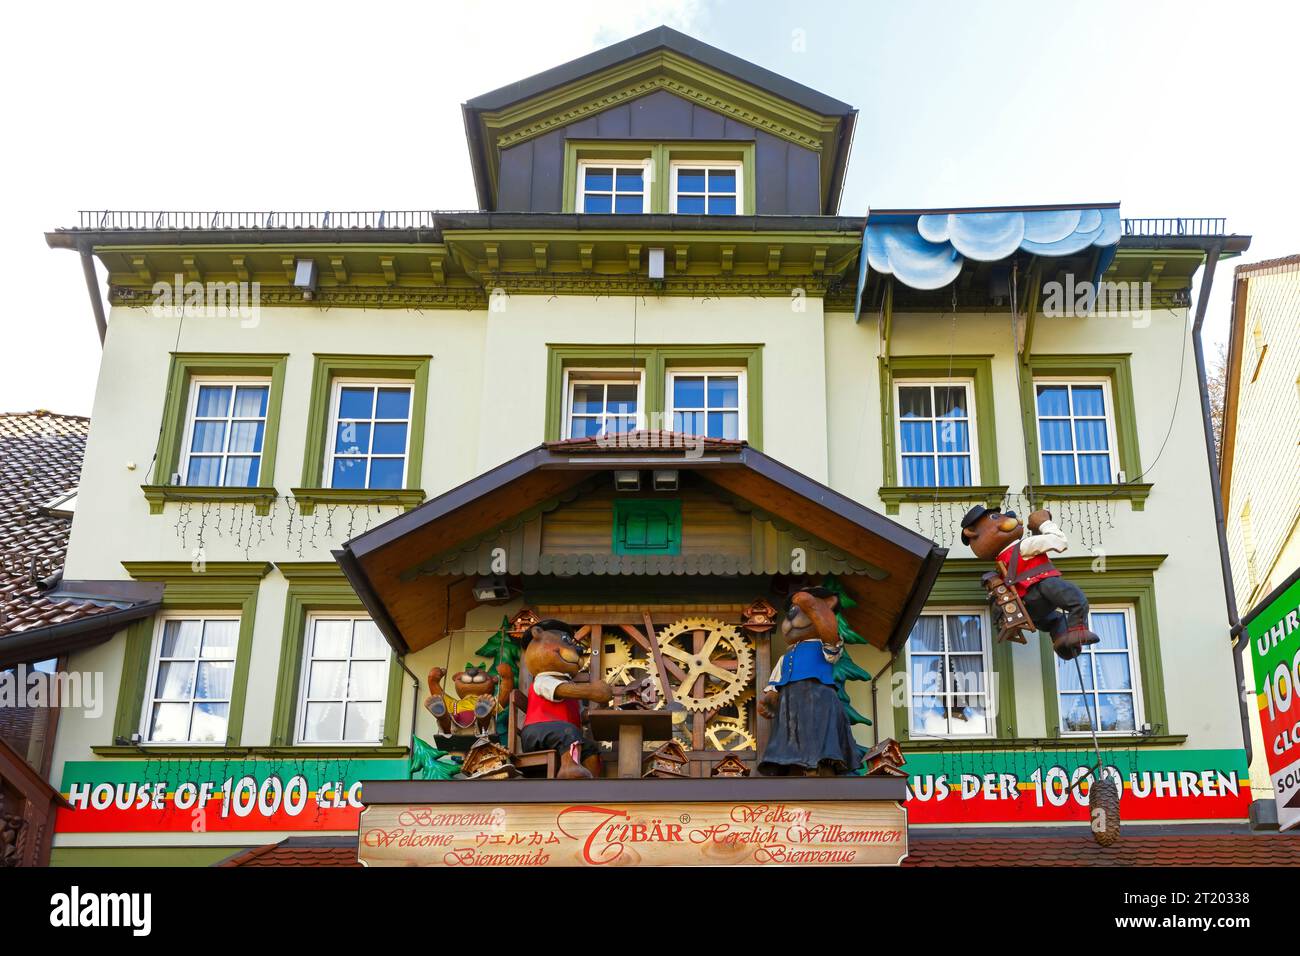 Triberg town famous for coo coo clock shops and stores, Black Forest region, Baden-Württemberg, Germany. Stock Photo